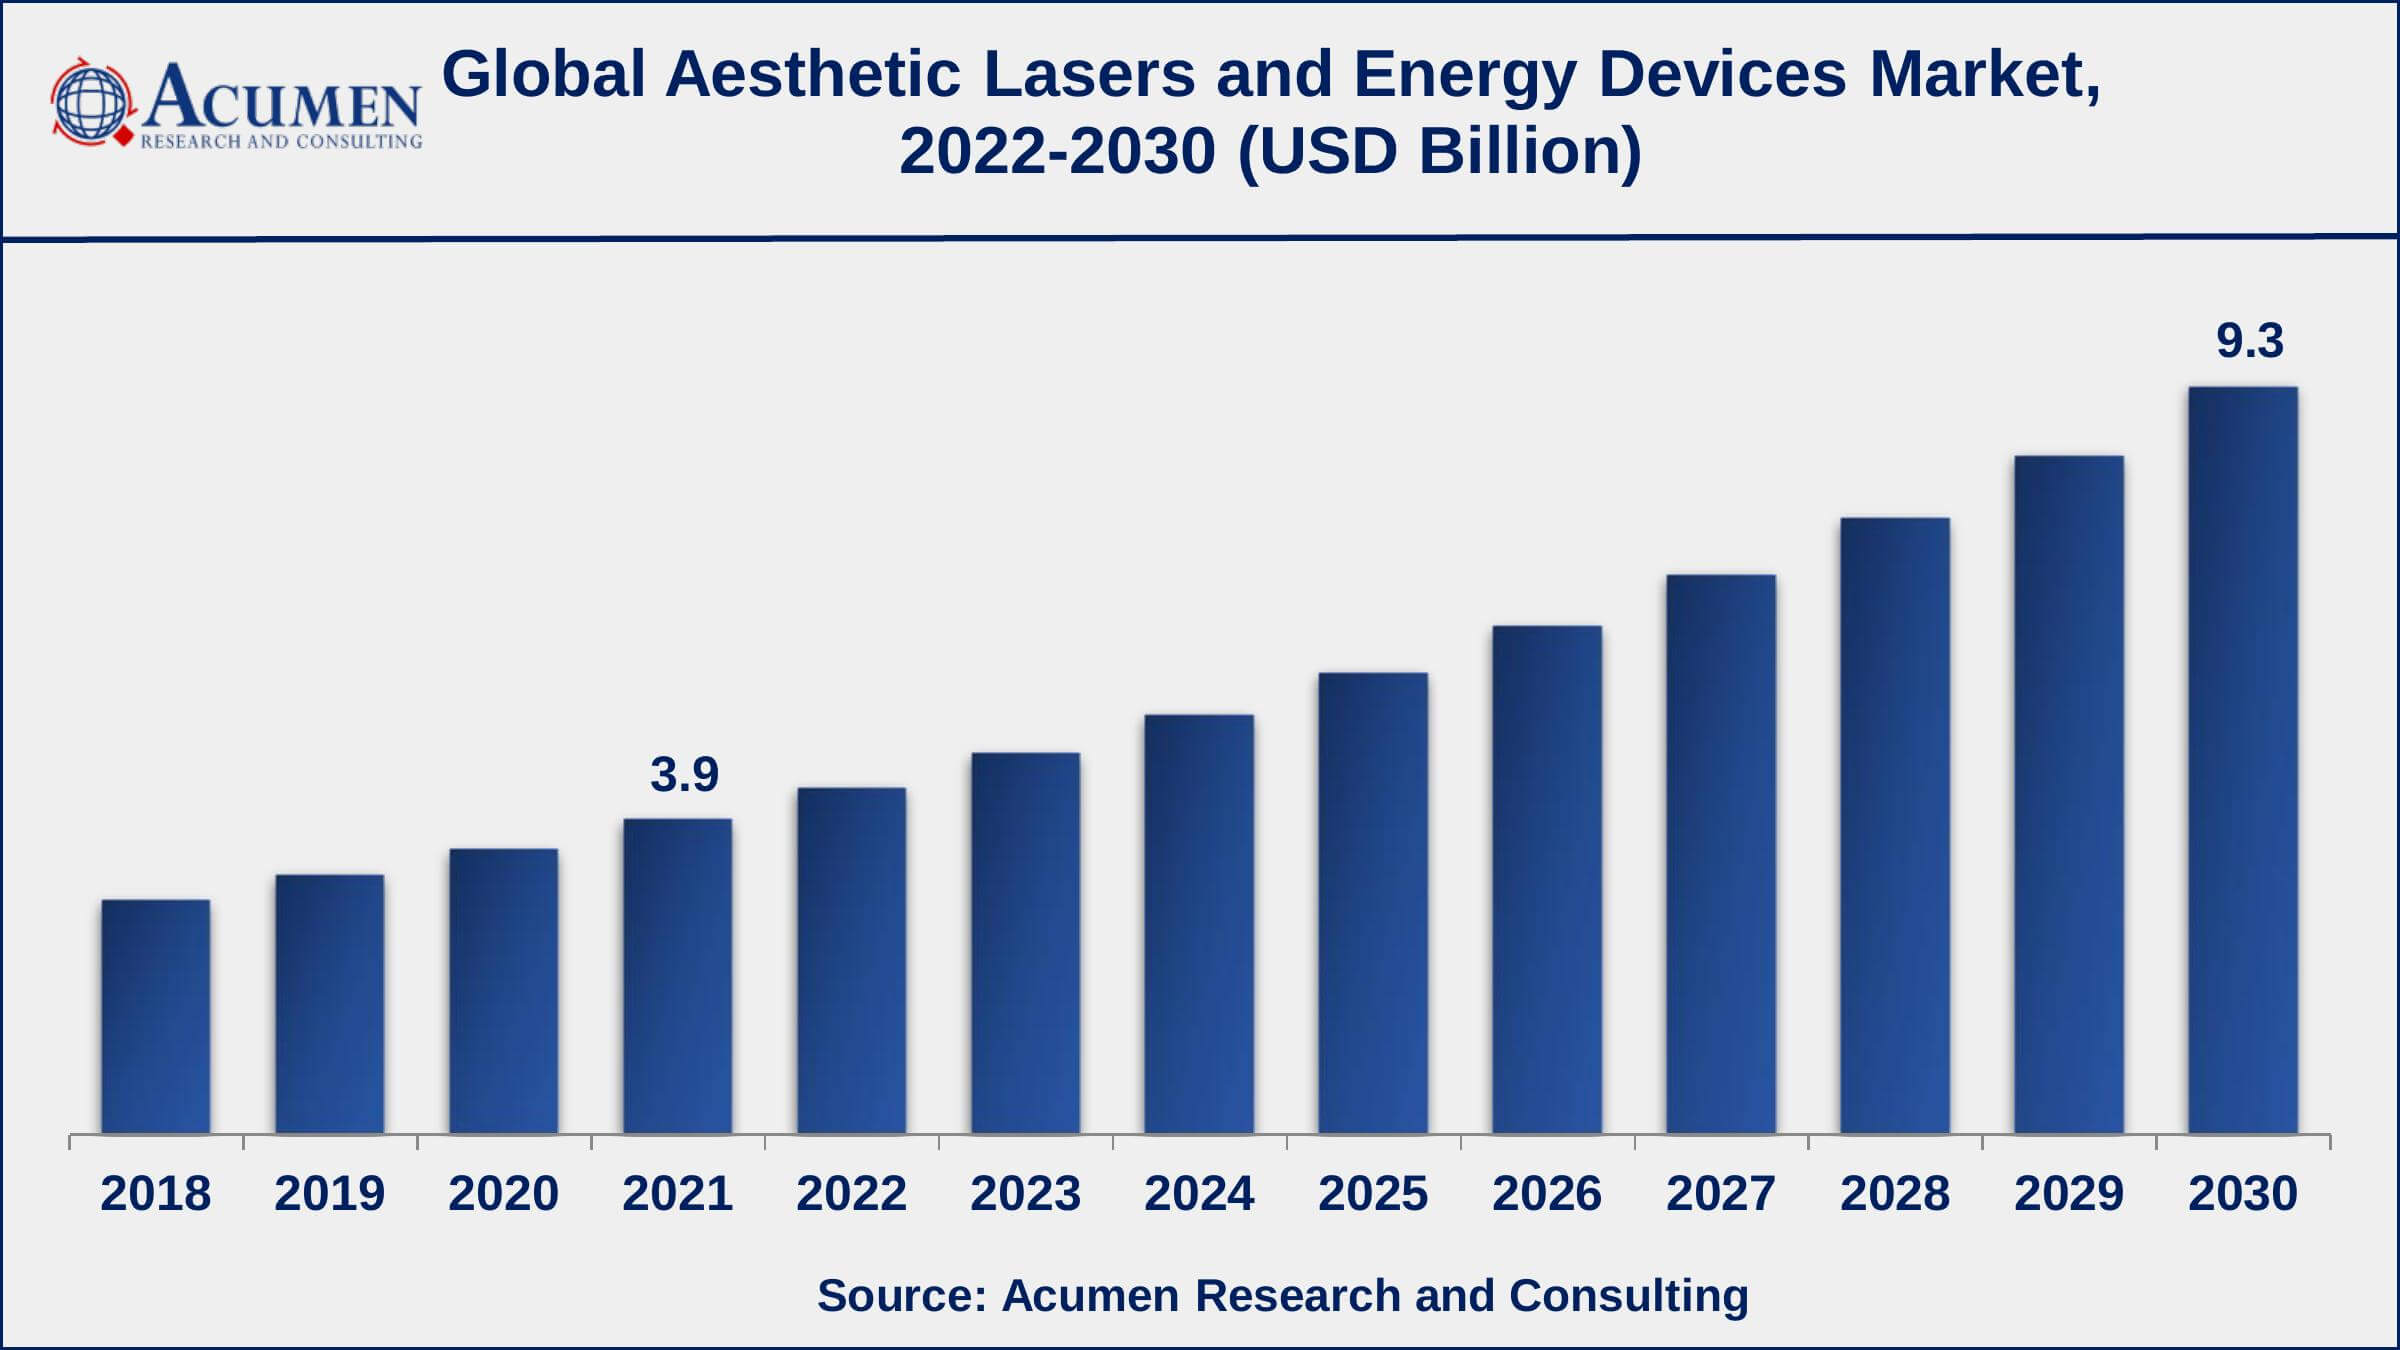 Asia-Pacific aesthetic lasers and energy devices market growth will register impressive CAGR of over 10.5% from 2022 to 2030